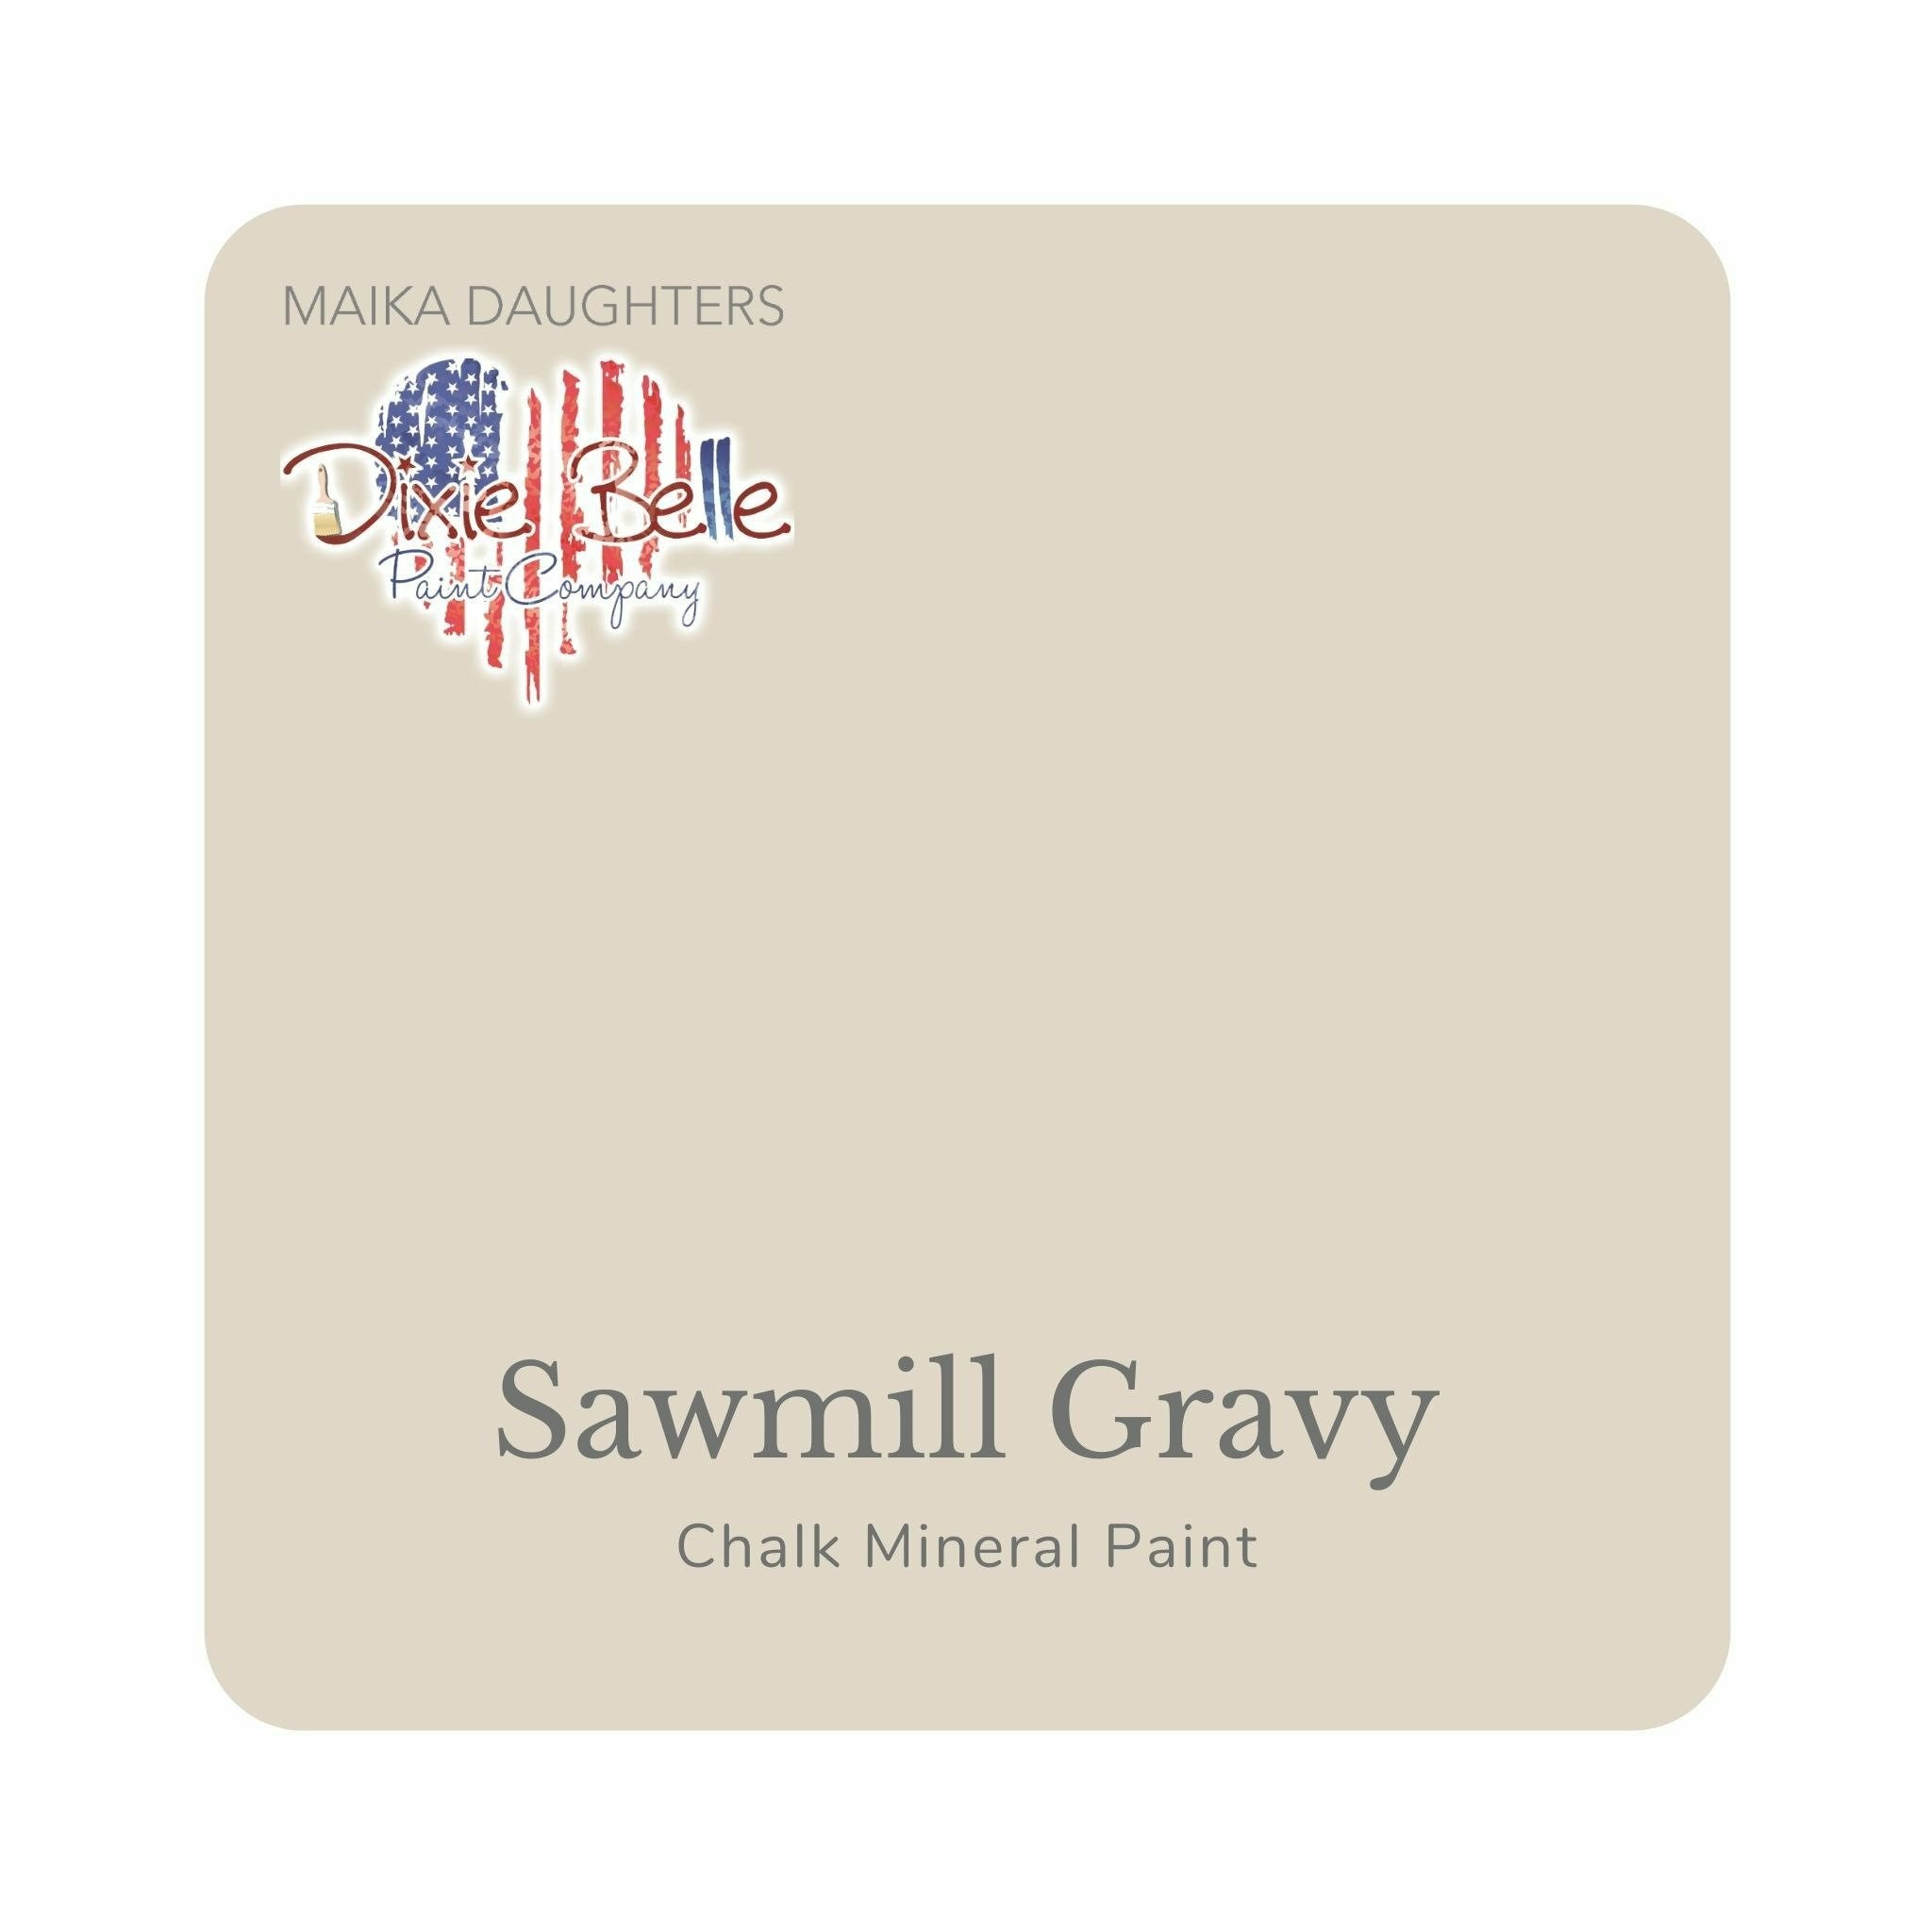 A square swatch card of Dixie Belle Paint Company’s Sawmill Gravy Chalk Mineral Paint is against a white background. This color is a smokey white.